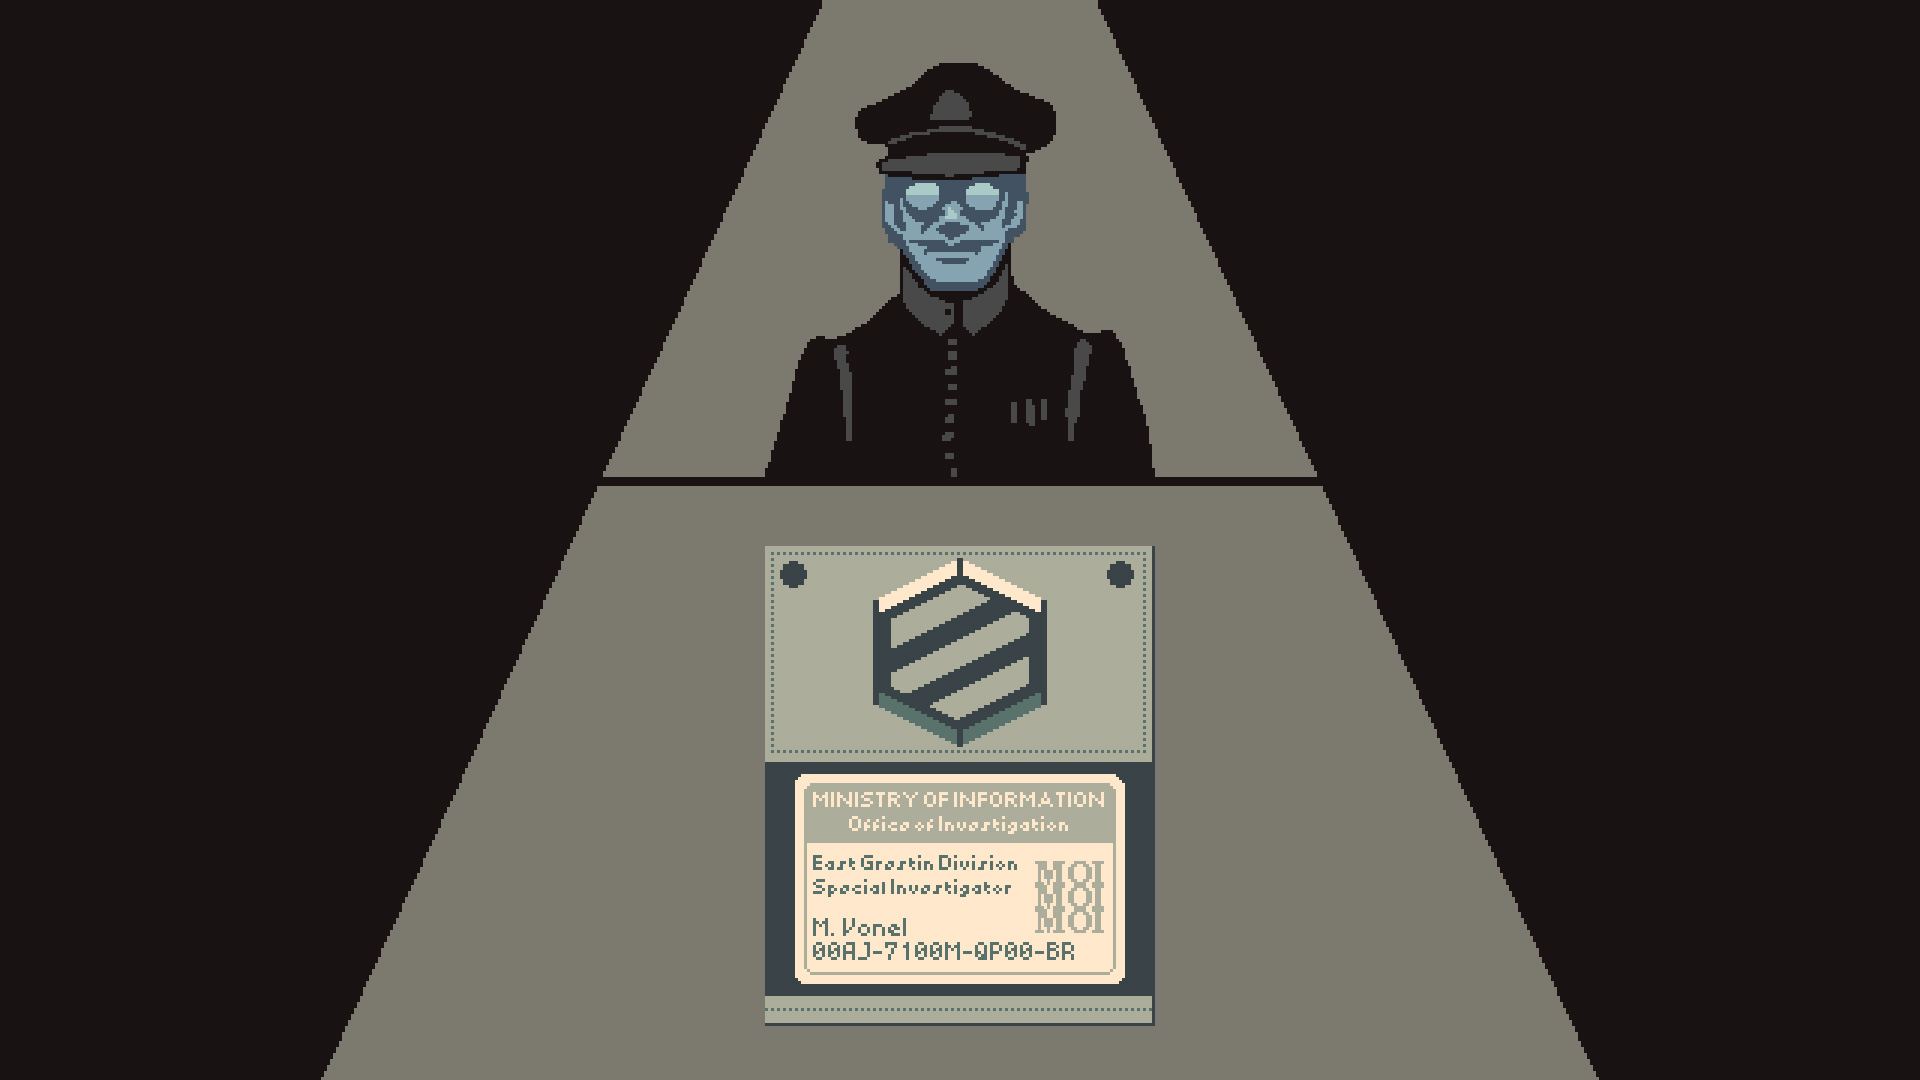 Papers, Please - M. Vonel | Steam Trading Cards Wiki | FANDOM powered